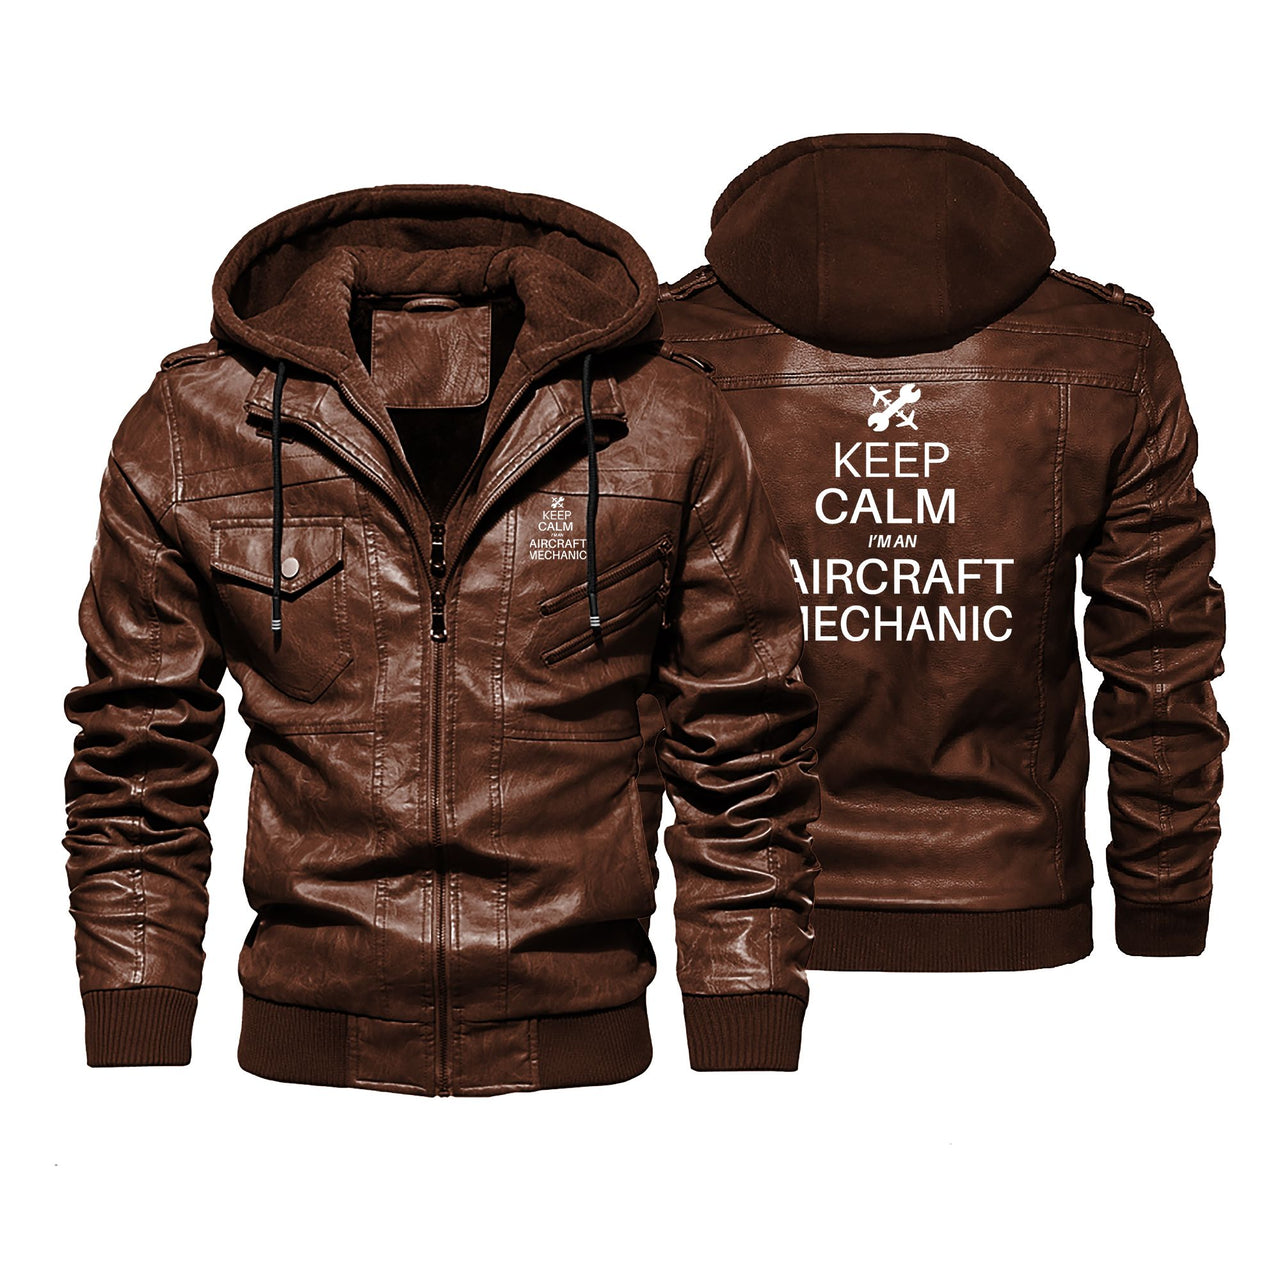 Aircraft Mechanic Designed Hooded Leather Jackets